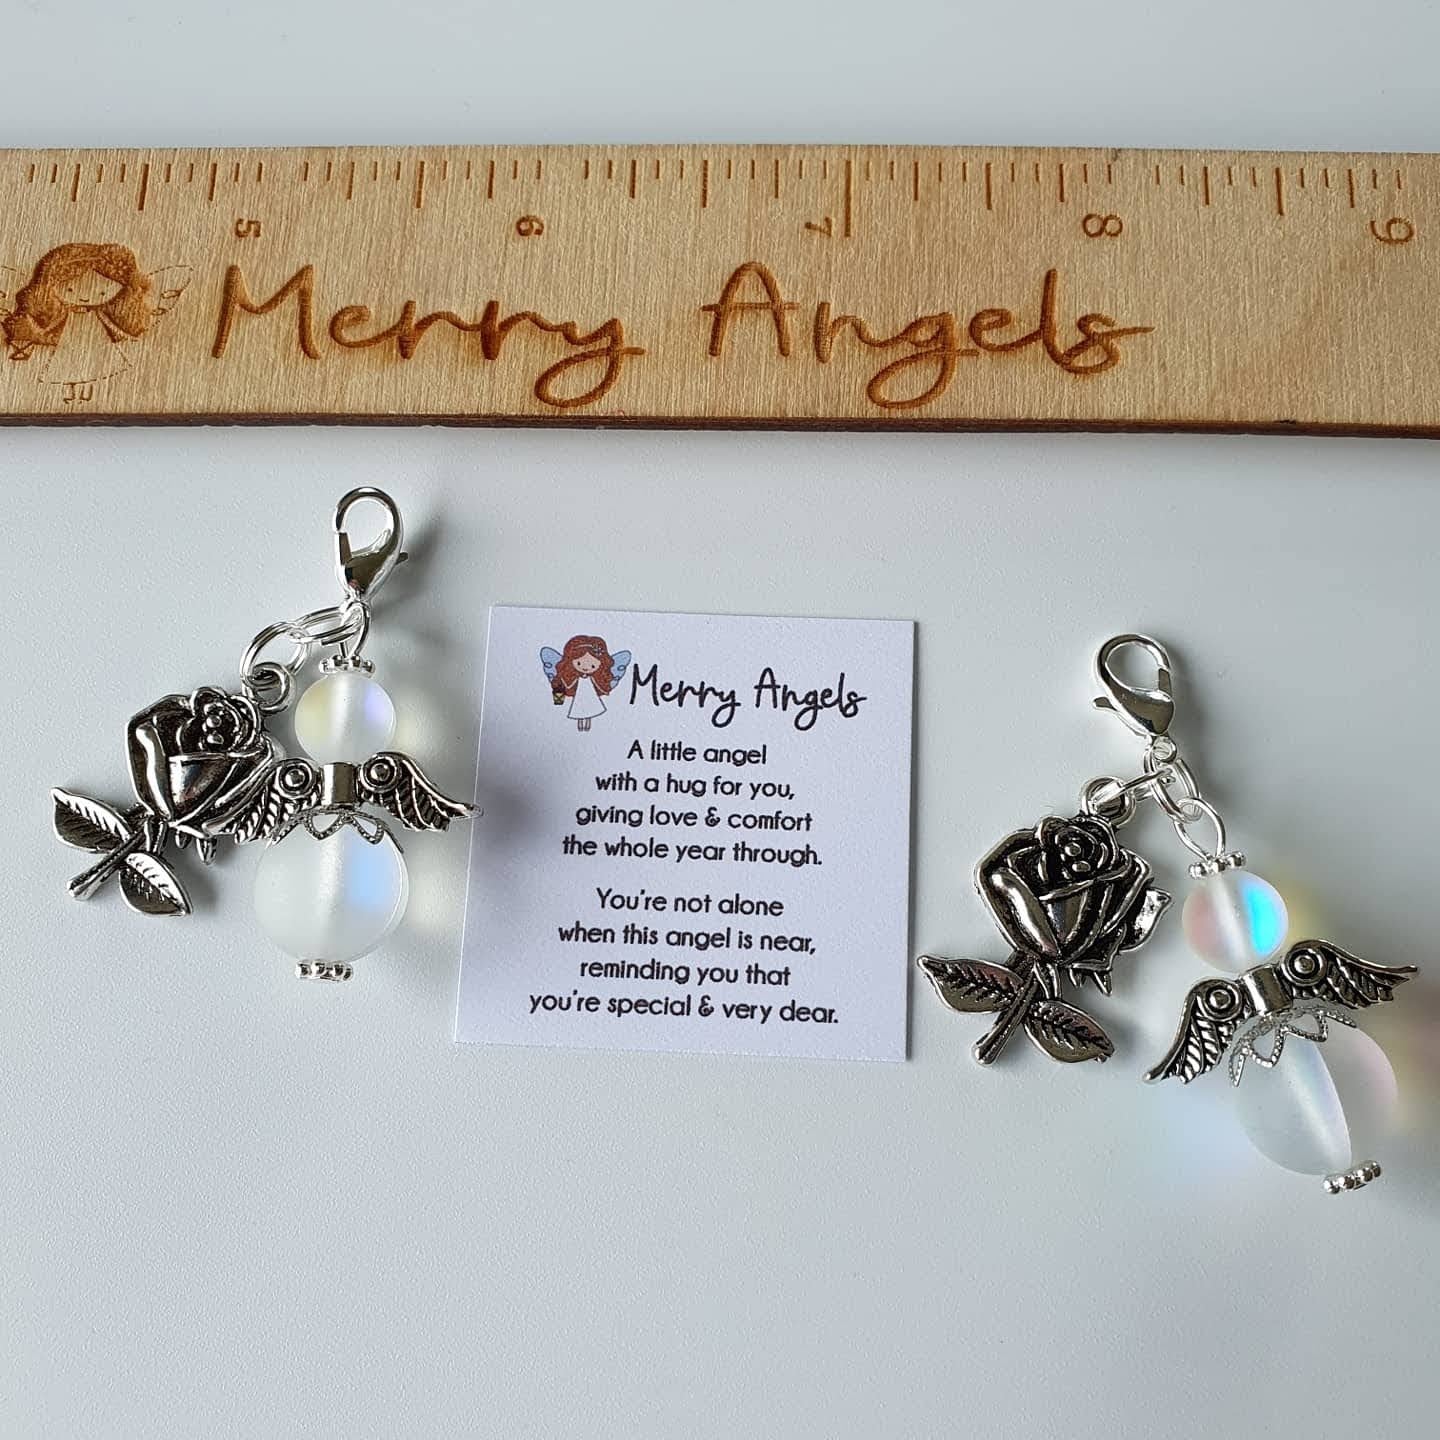 This is a picture of two angel hugs  with silver rose charms attached to both